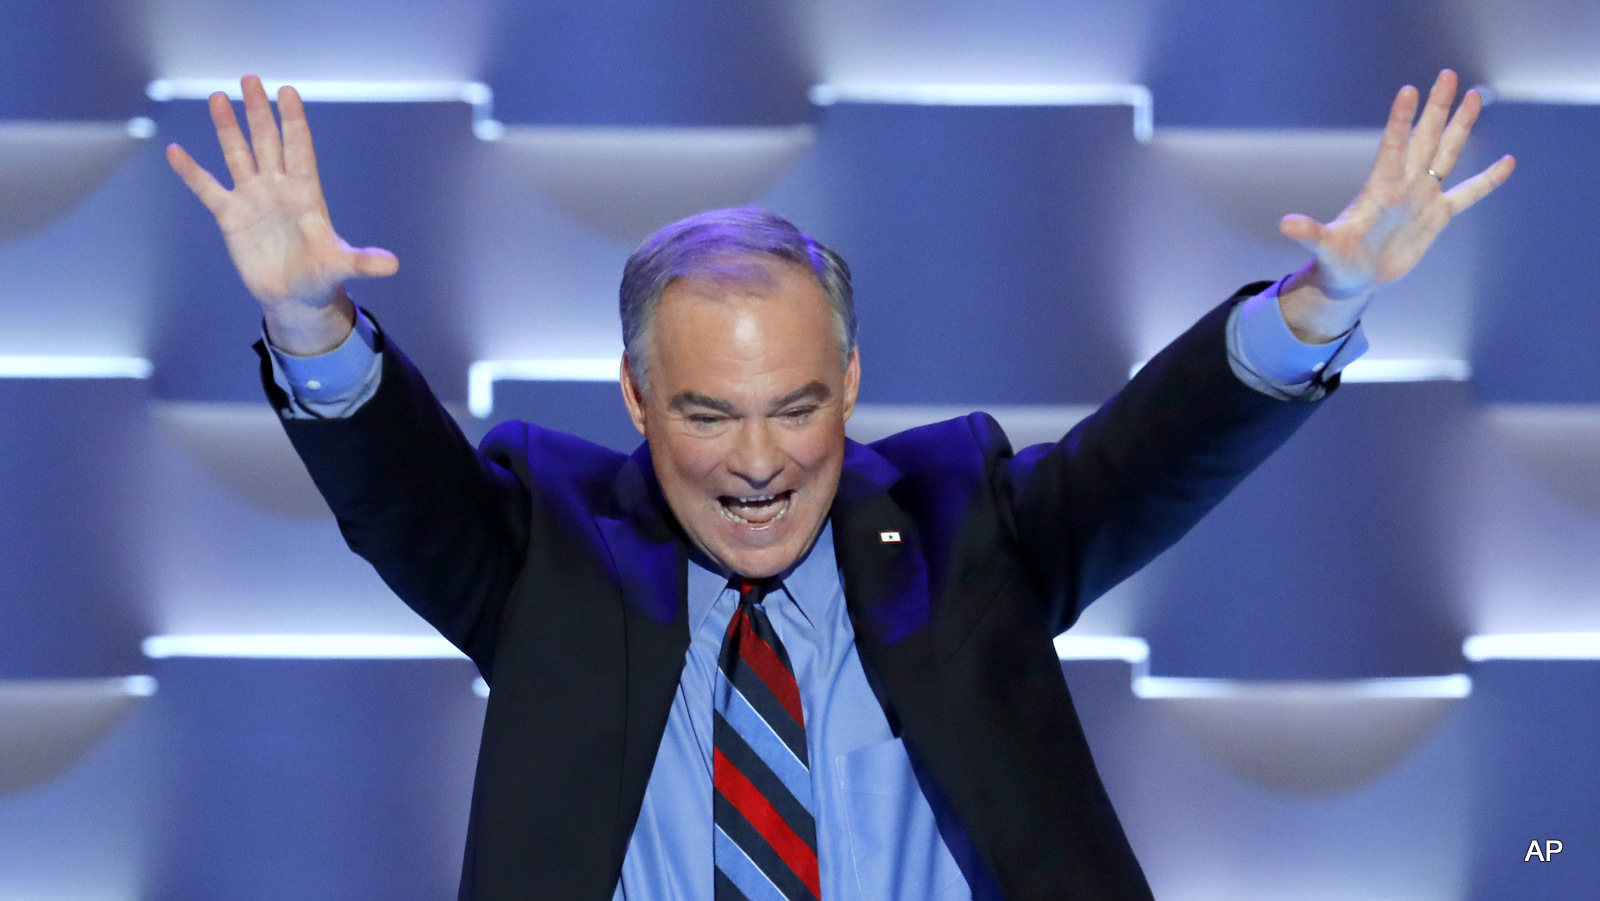 Democratic vice presidential candidate, Sen. Tim Kaine, D-Va., waves to the crowd after speaking during the third day of the Democratic National Convention in Philadelphia , Wednesday, July 27, 2016. 